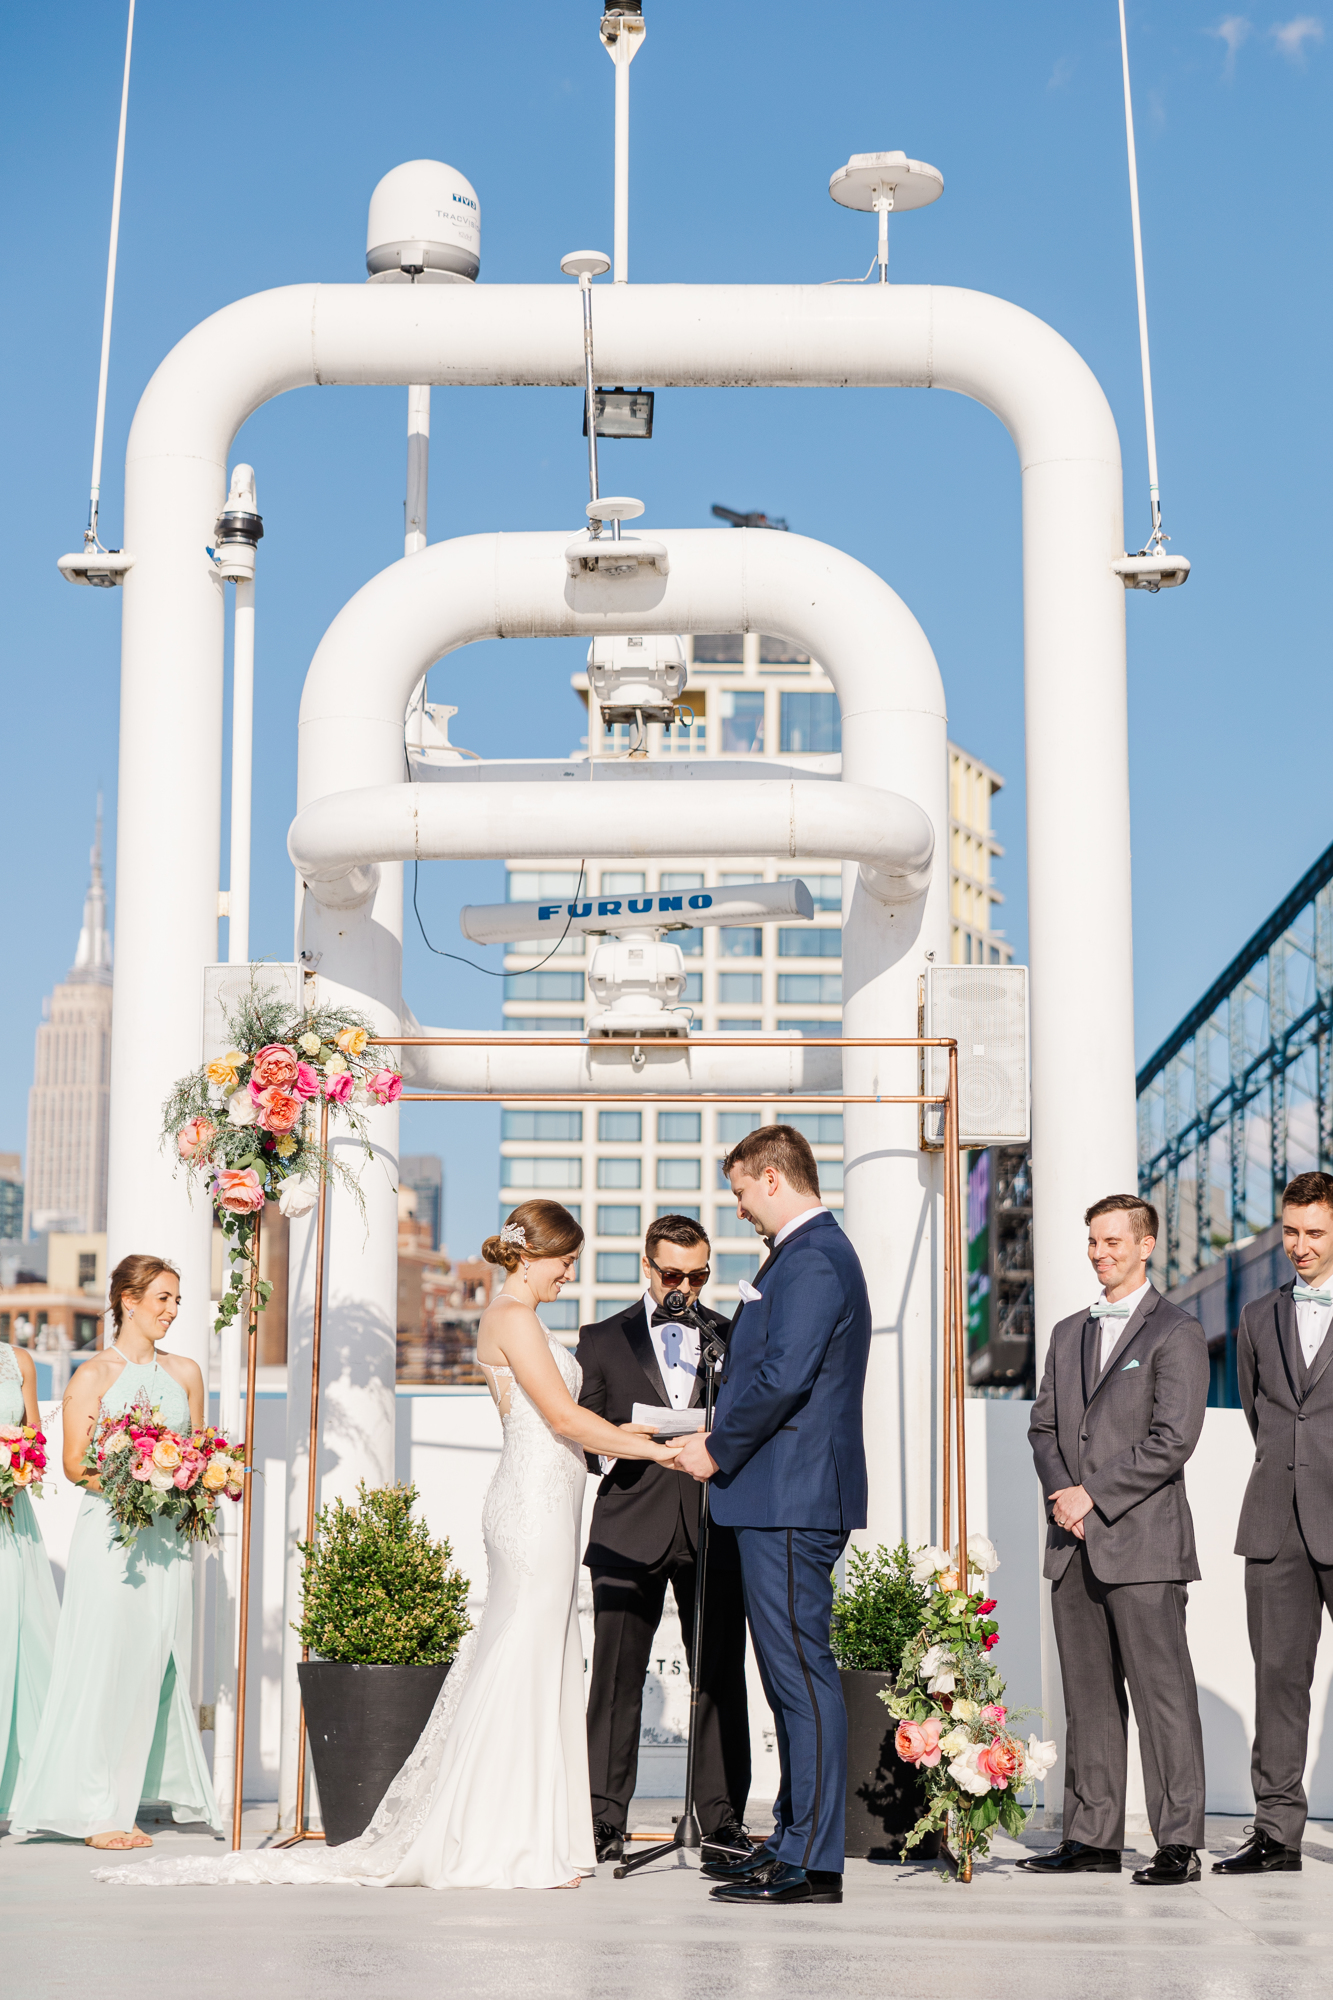 Timeless Wedding Photography in New York City on a Boat